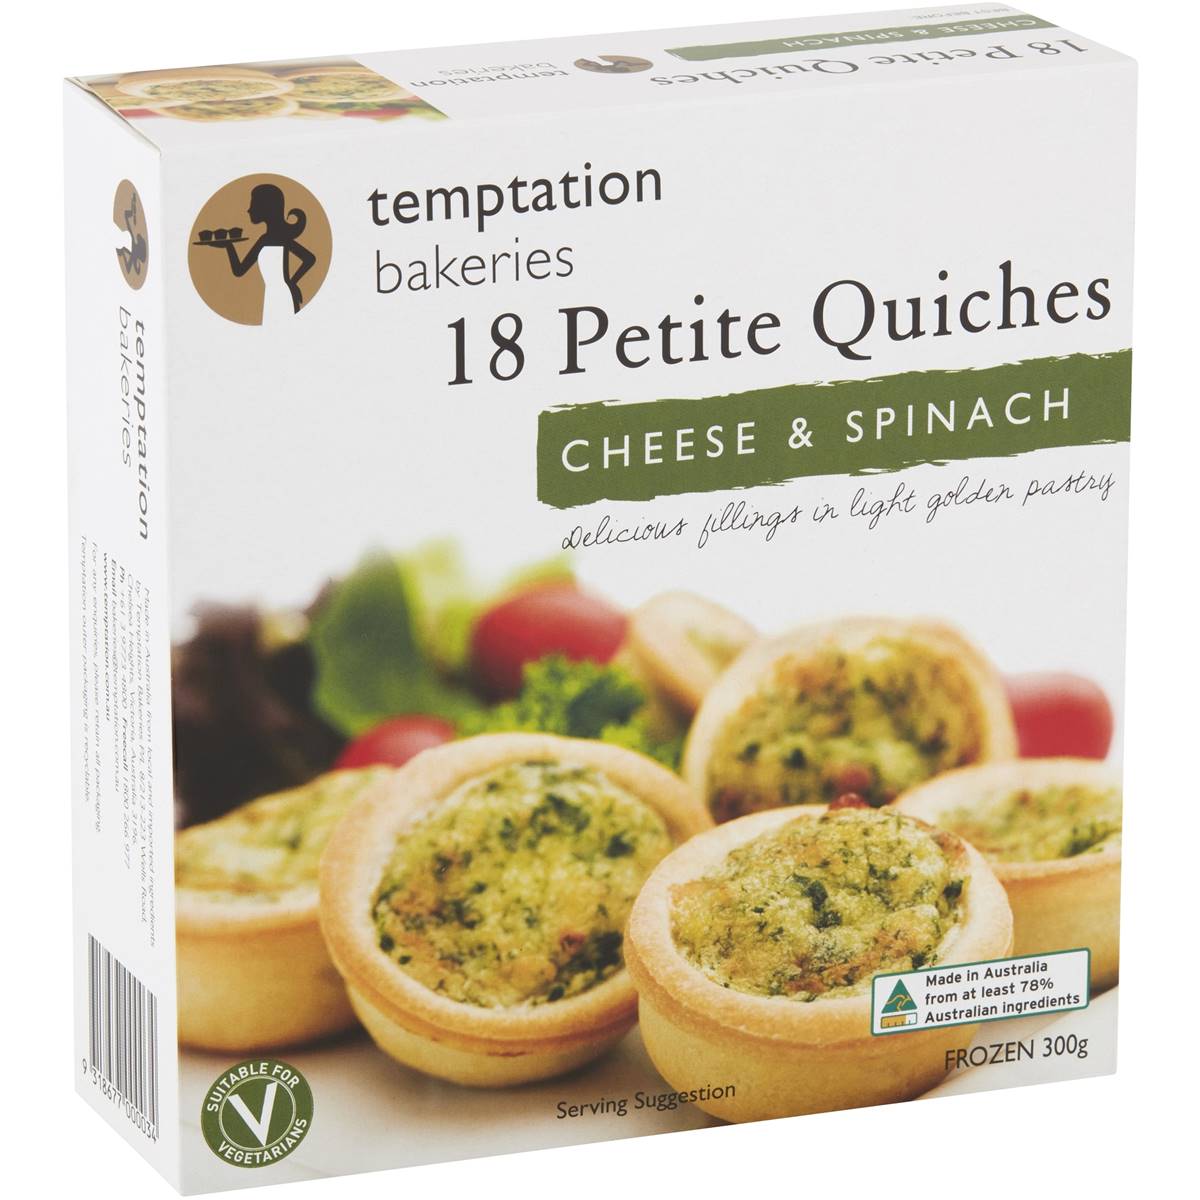 Calories in Temptation Bakeries Quiche Petite Cheese & Spinach